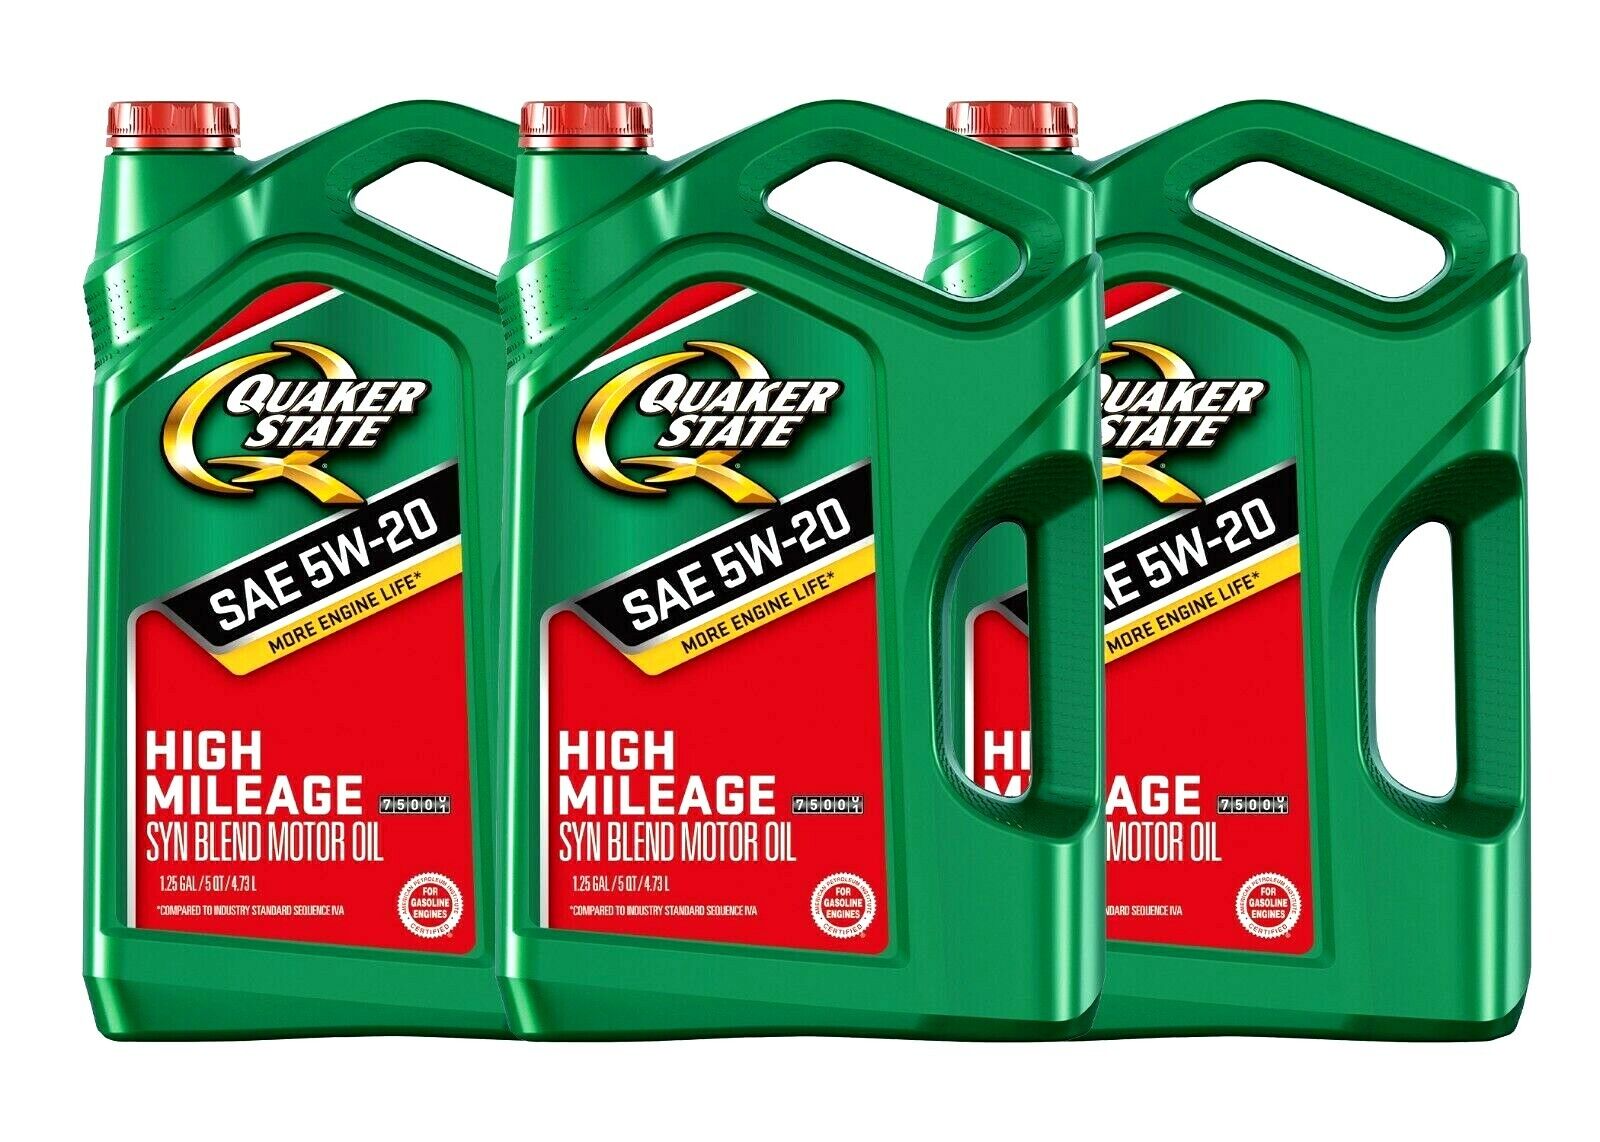 Quaker State High Mileage 5W-20,5W-30,10W-30,10W-40 Synthetic Blend Motor Oil 5Q